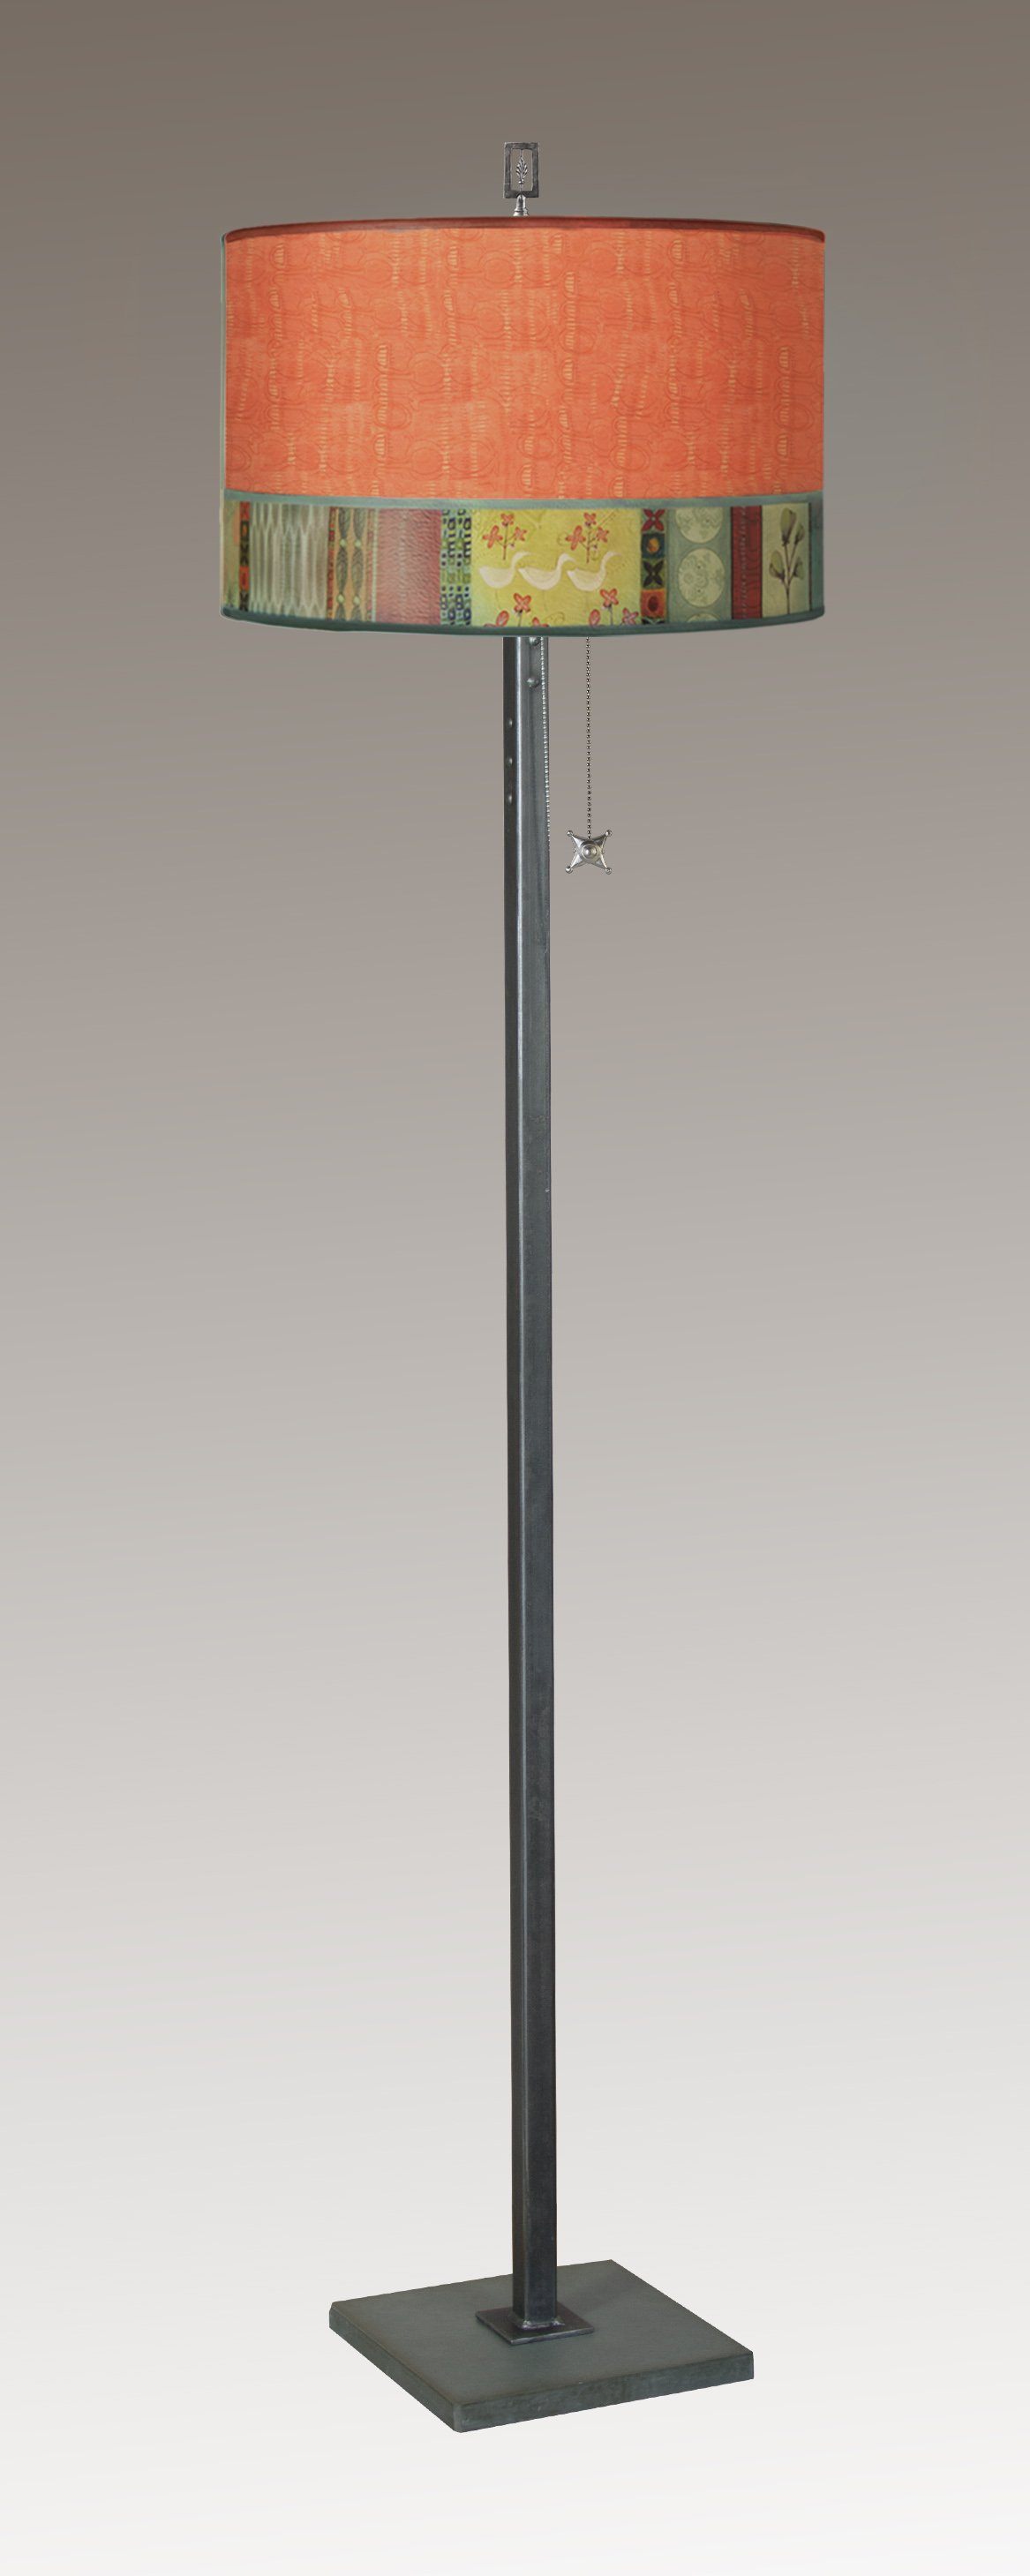 Steel Floor Lamp with Large Drum Shade in Melody in Coral